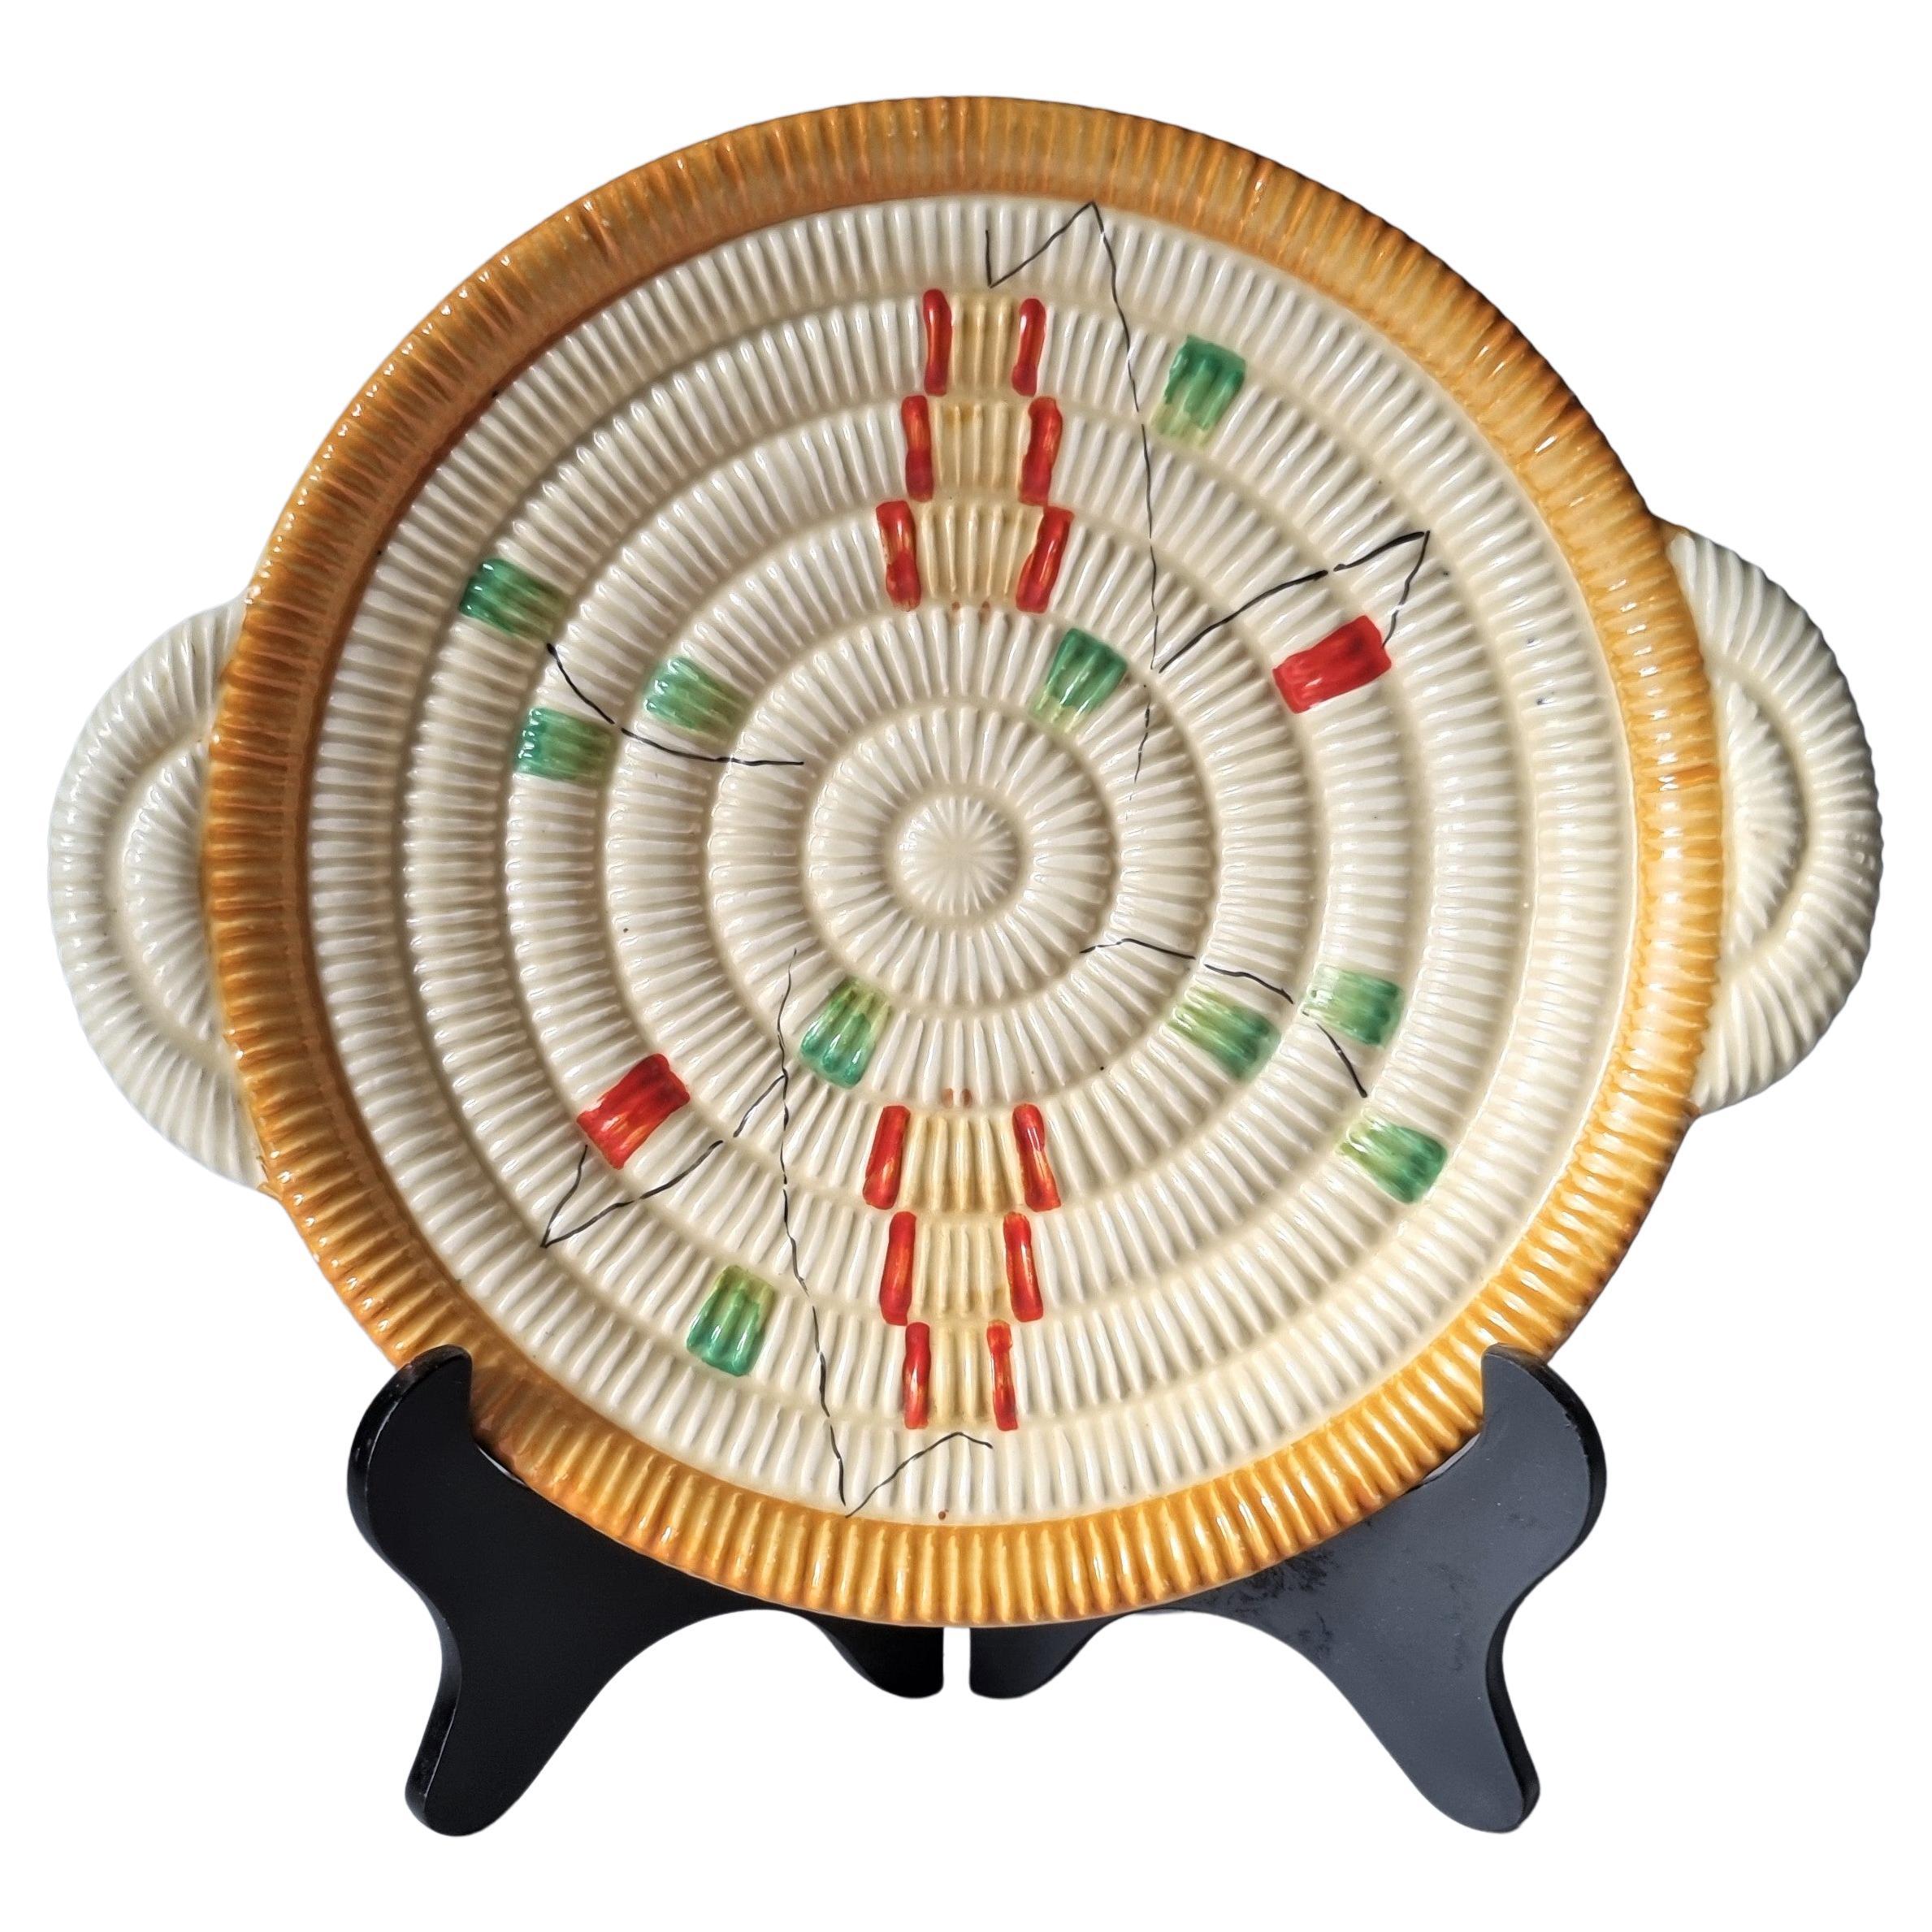 Clarice Cliff for Newport Pottery, 1936-37 Raffia Indiana Series, Textured Dish For Sale